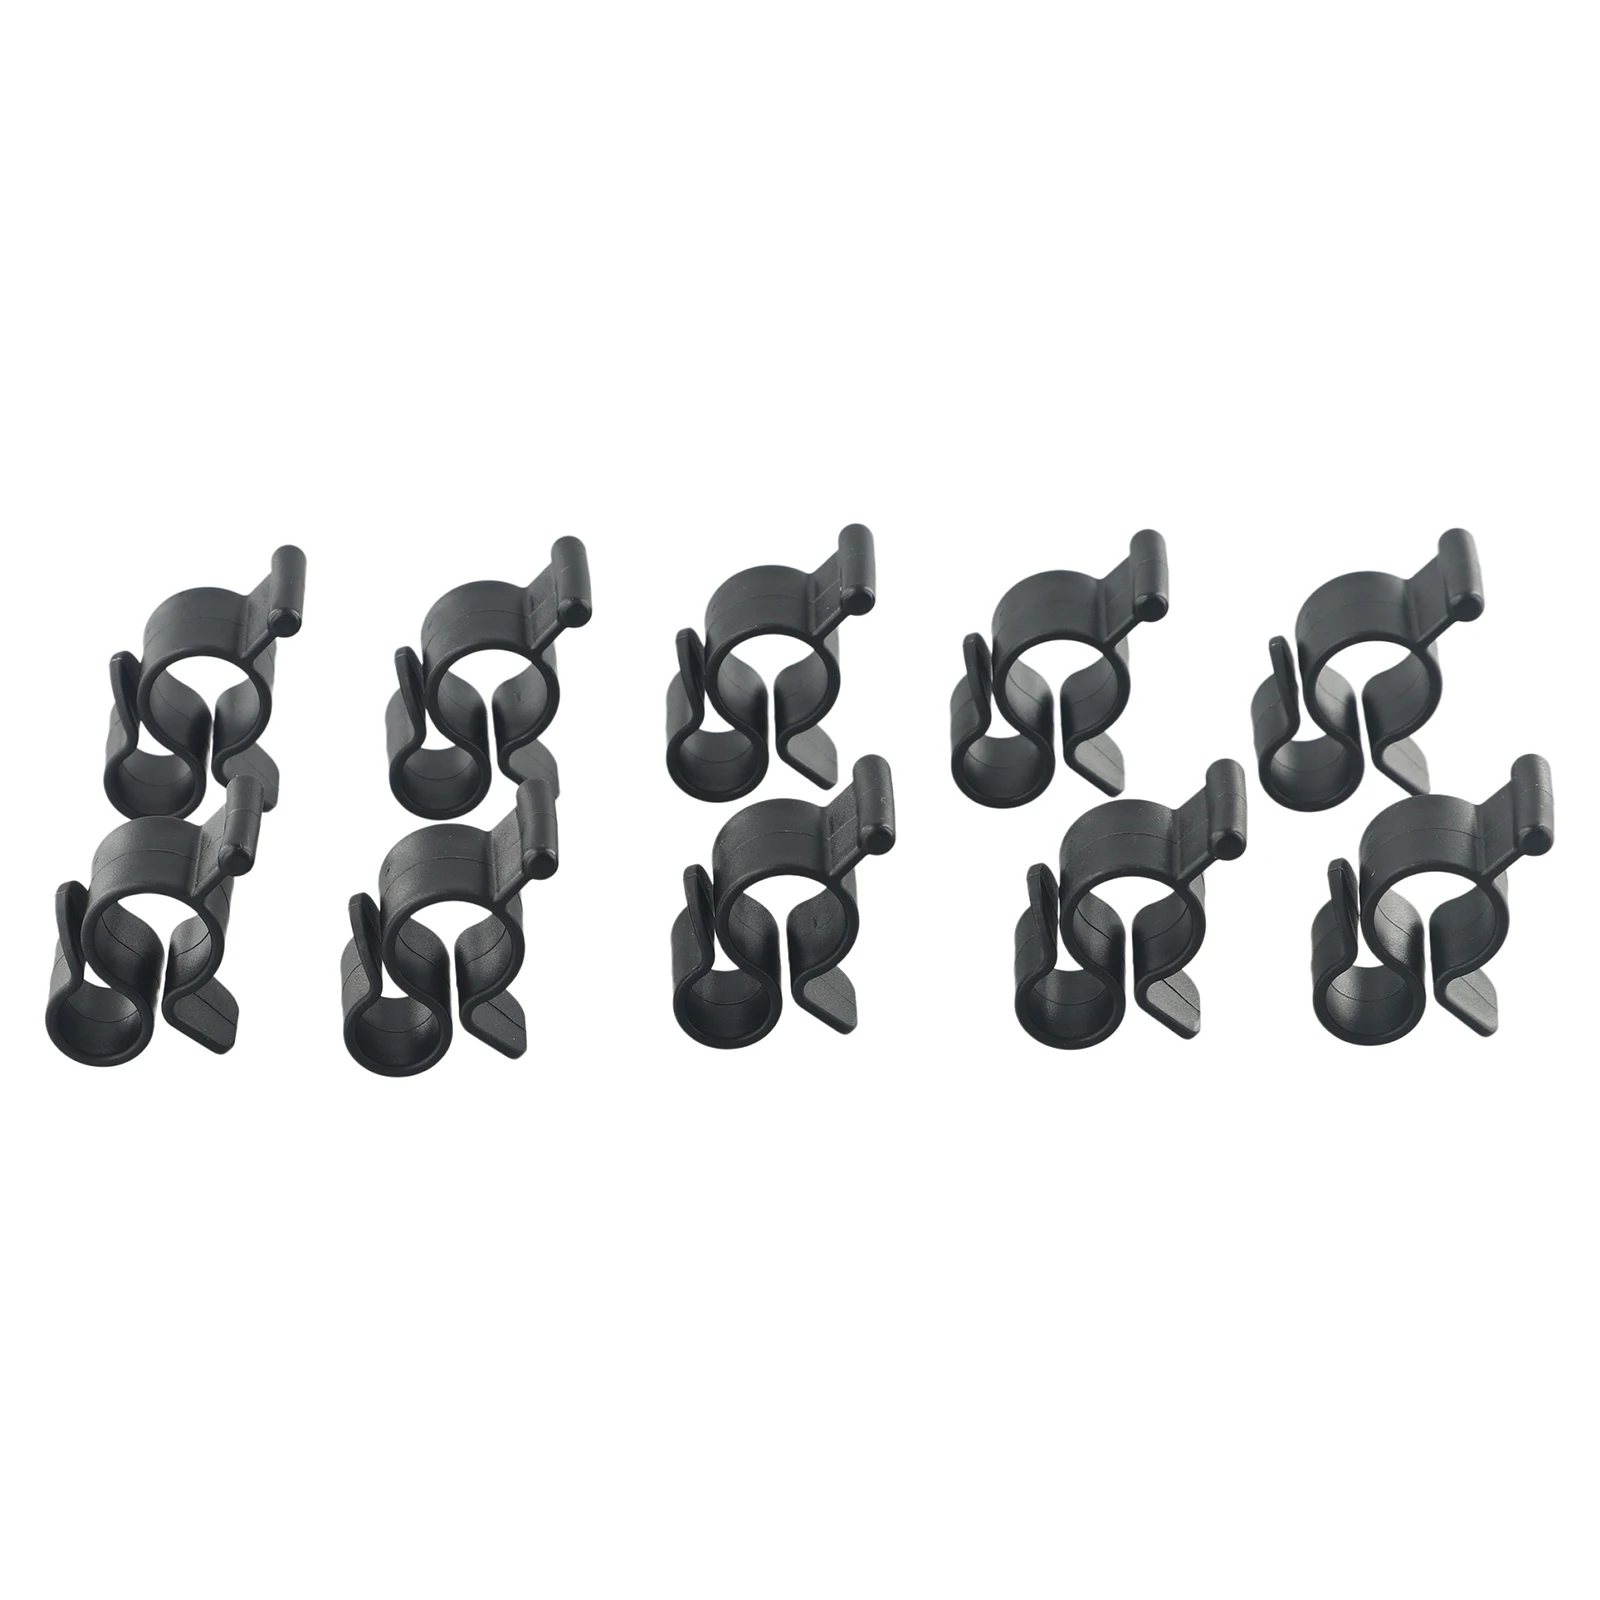 Two Hook Sizes Tent Hooks Hooks Clips 1.57x1.14inch 40x29mm Awning Rope Light Clips Black RV For Caravan Camper 10pcs 12v round rocker switch black mini round black on off switches for 2 pin spst camper van caravan motorhome